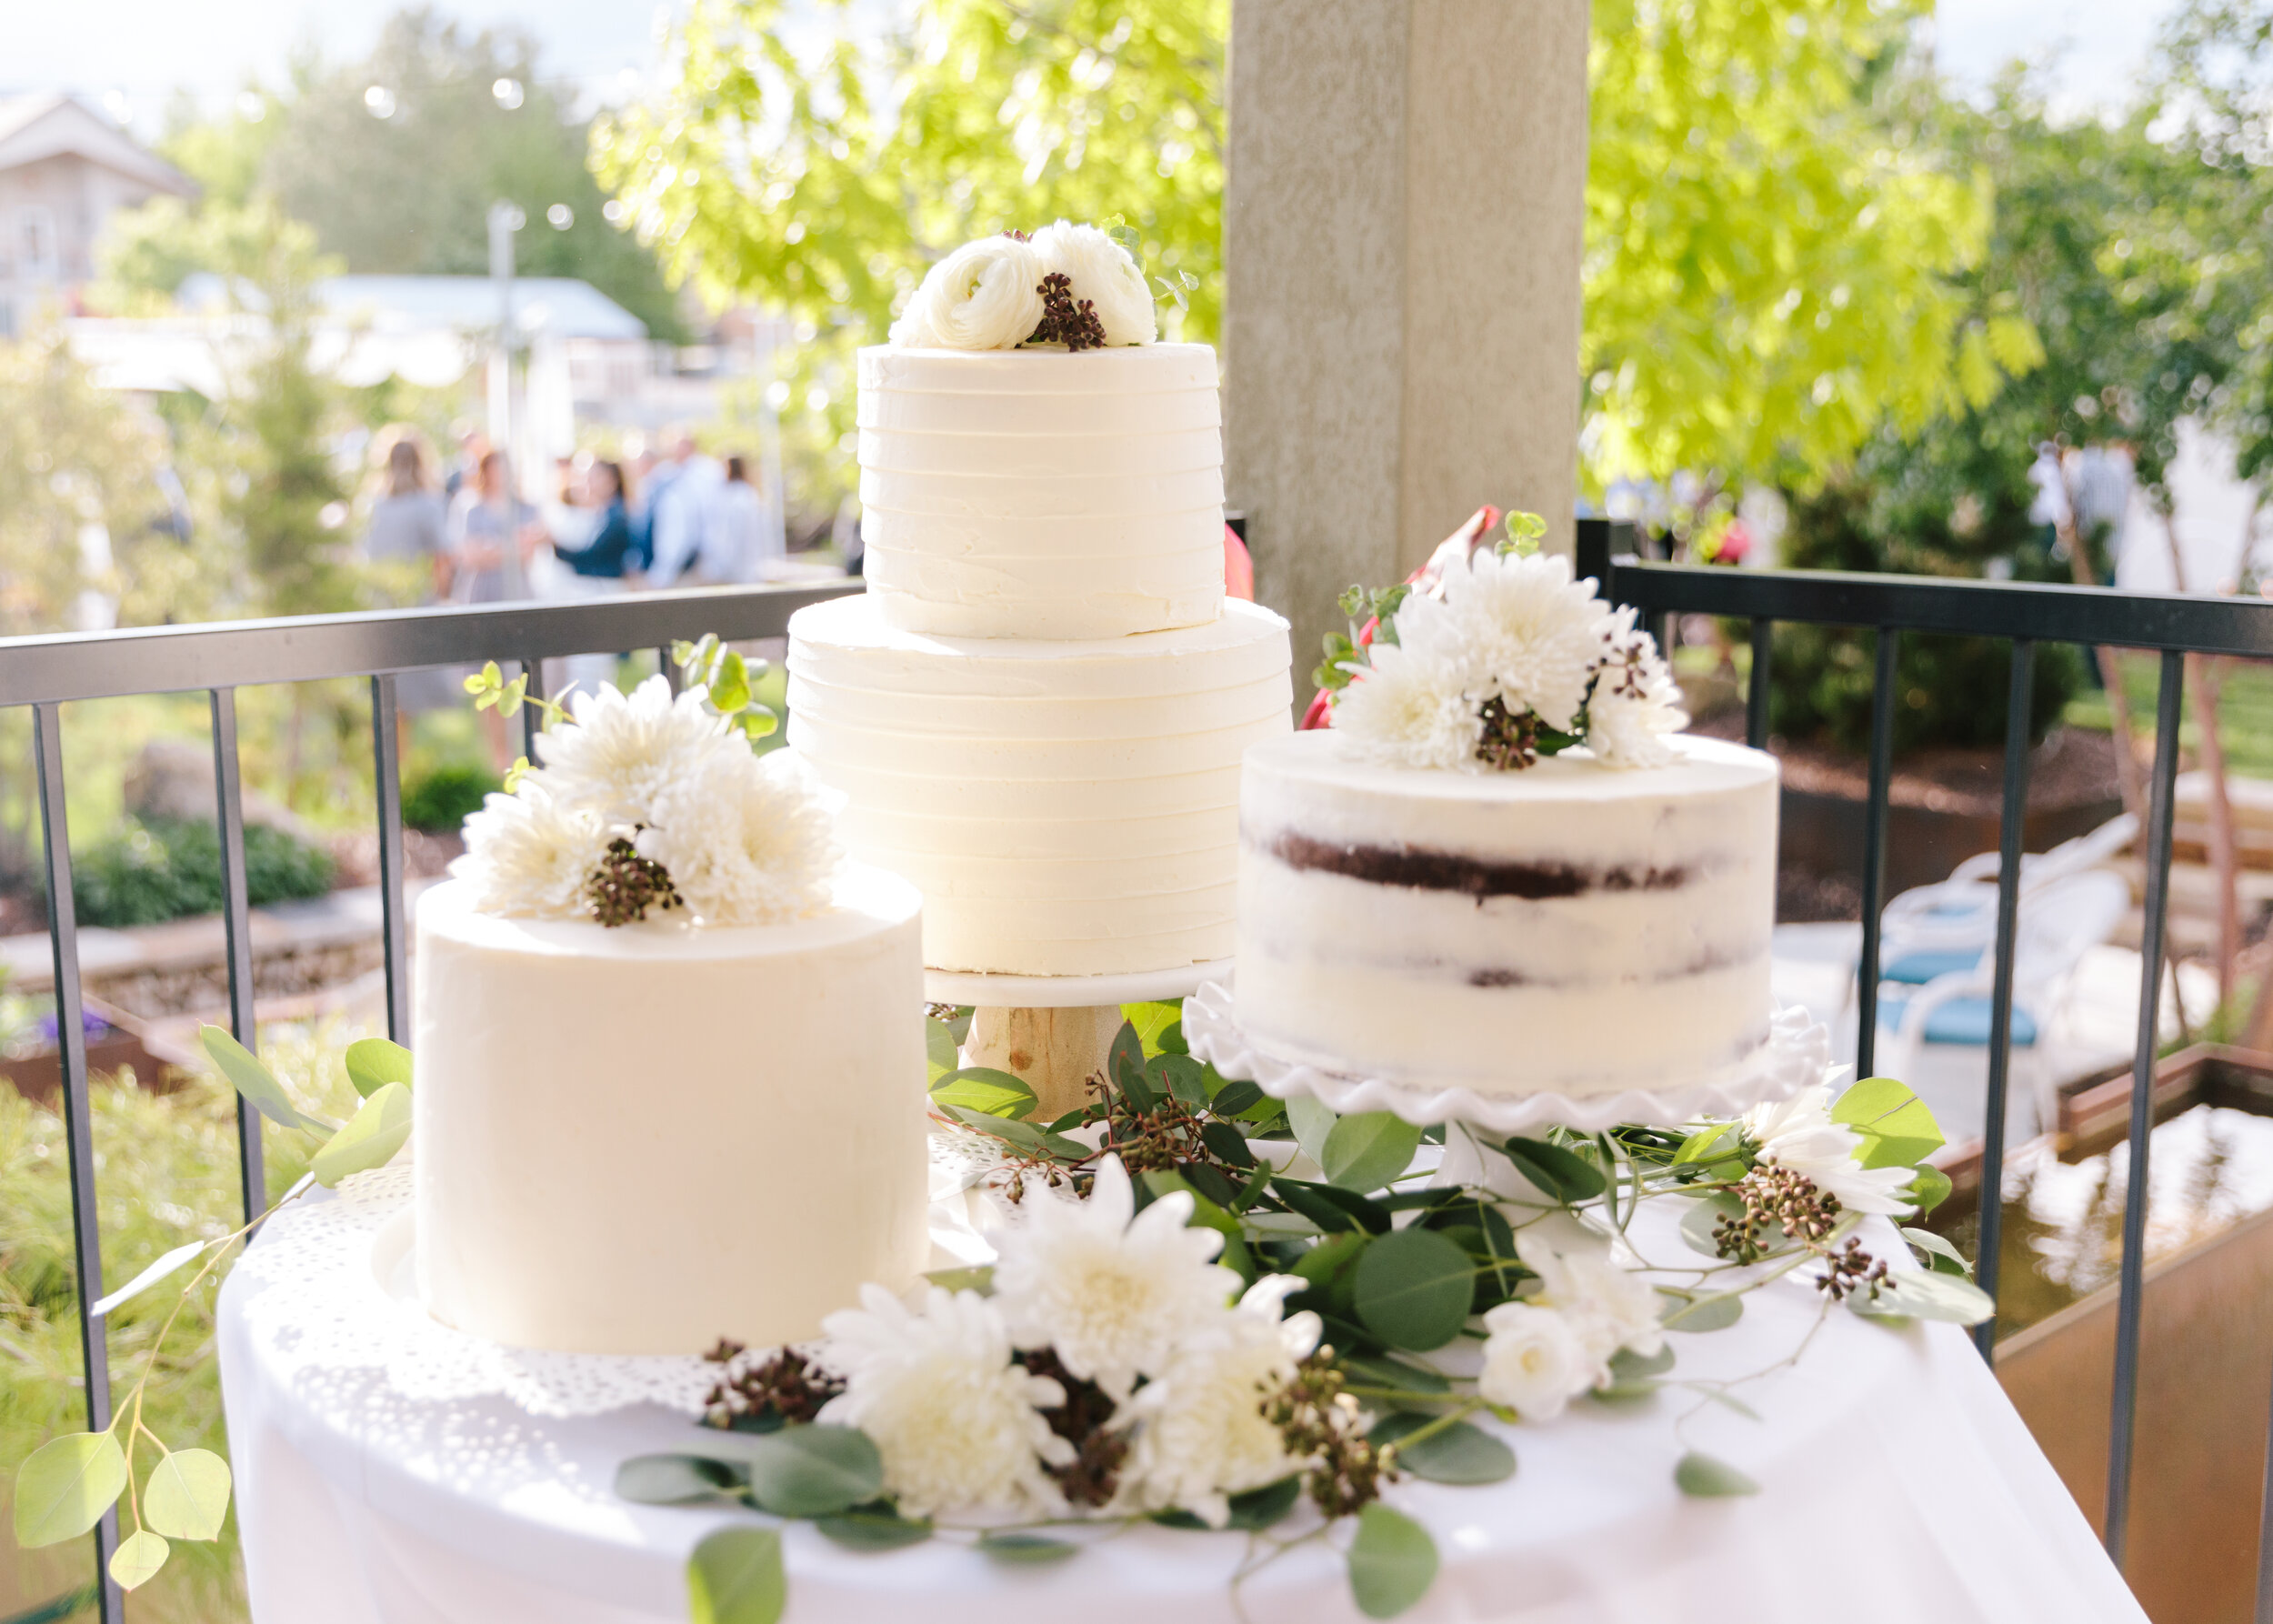  use cutting your cake as a distraction for your guest while helpers set out the desserts display the schedule of events seven ways to break tradition to make your wedding reception different seven ways to make your reception run smoothly organize yo